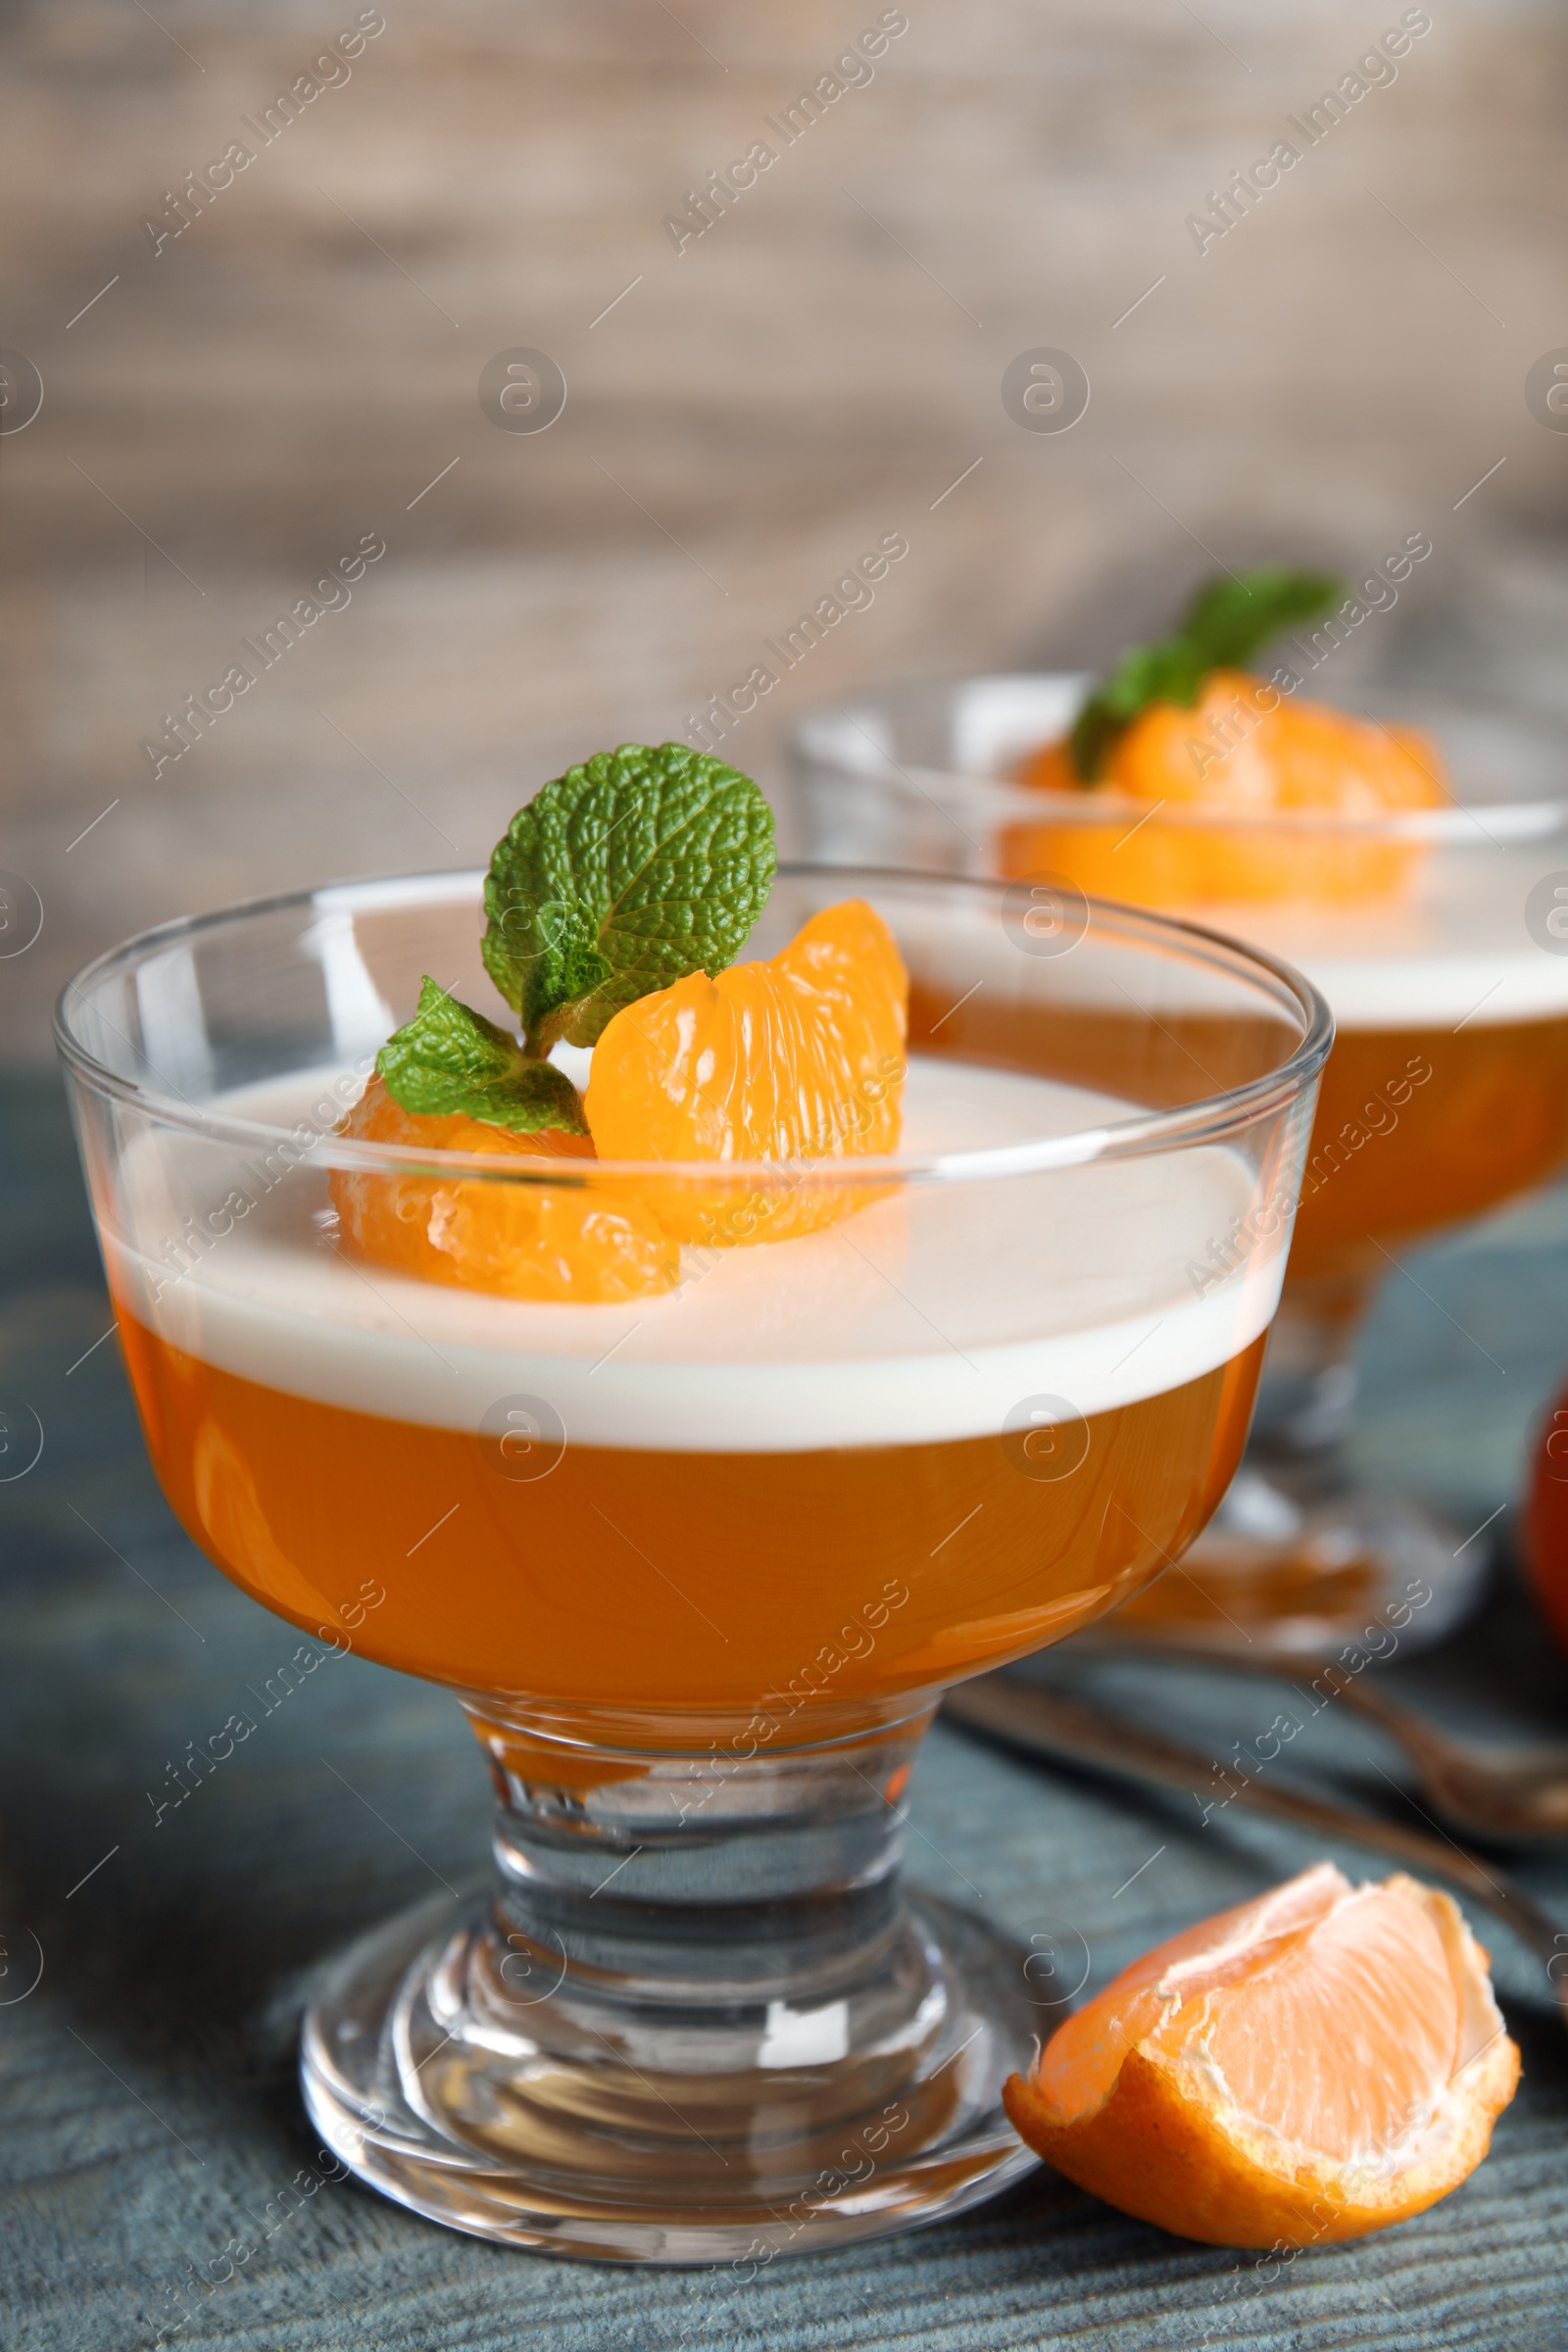 Photo of Delicious tangerine jelly on light blue wooden table, closeup